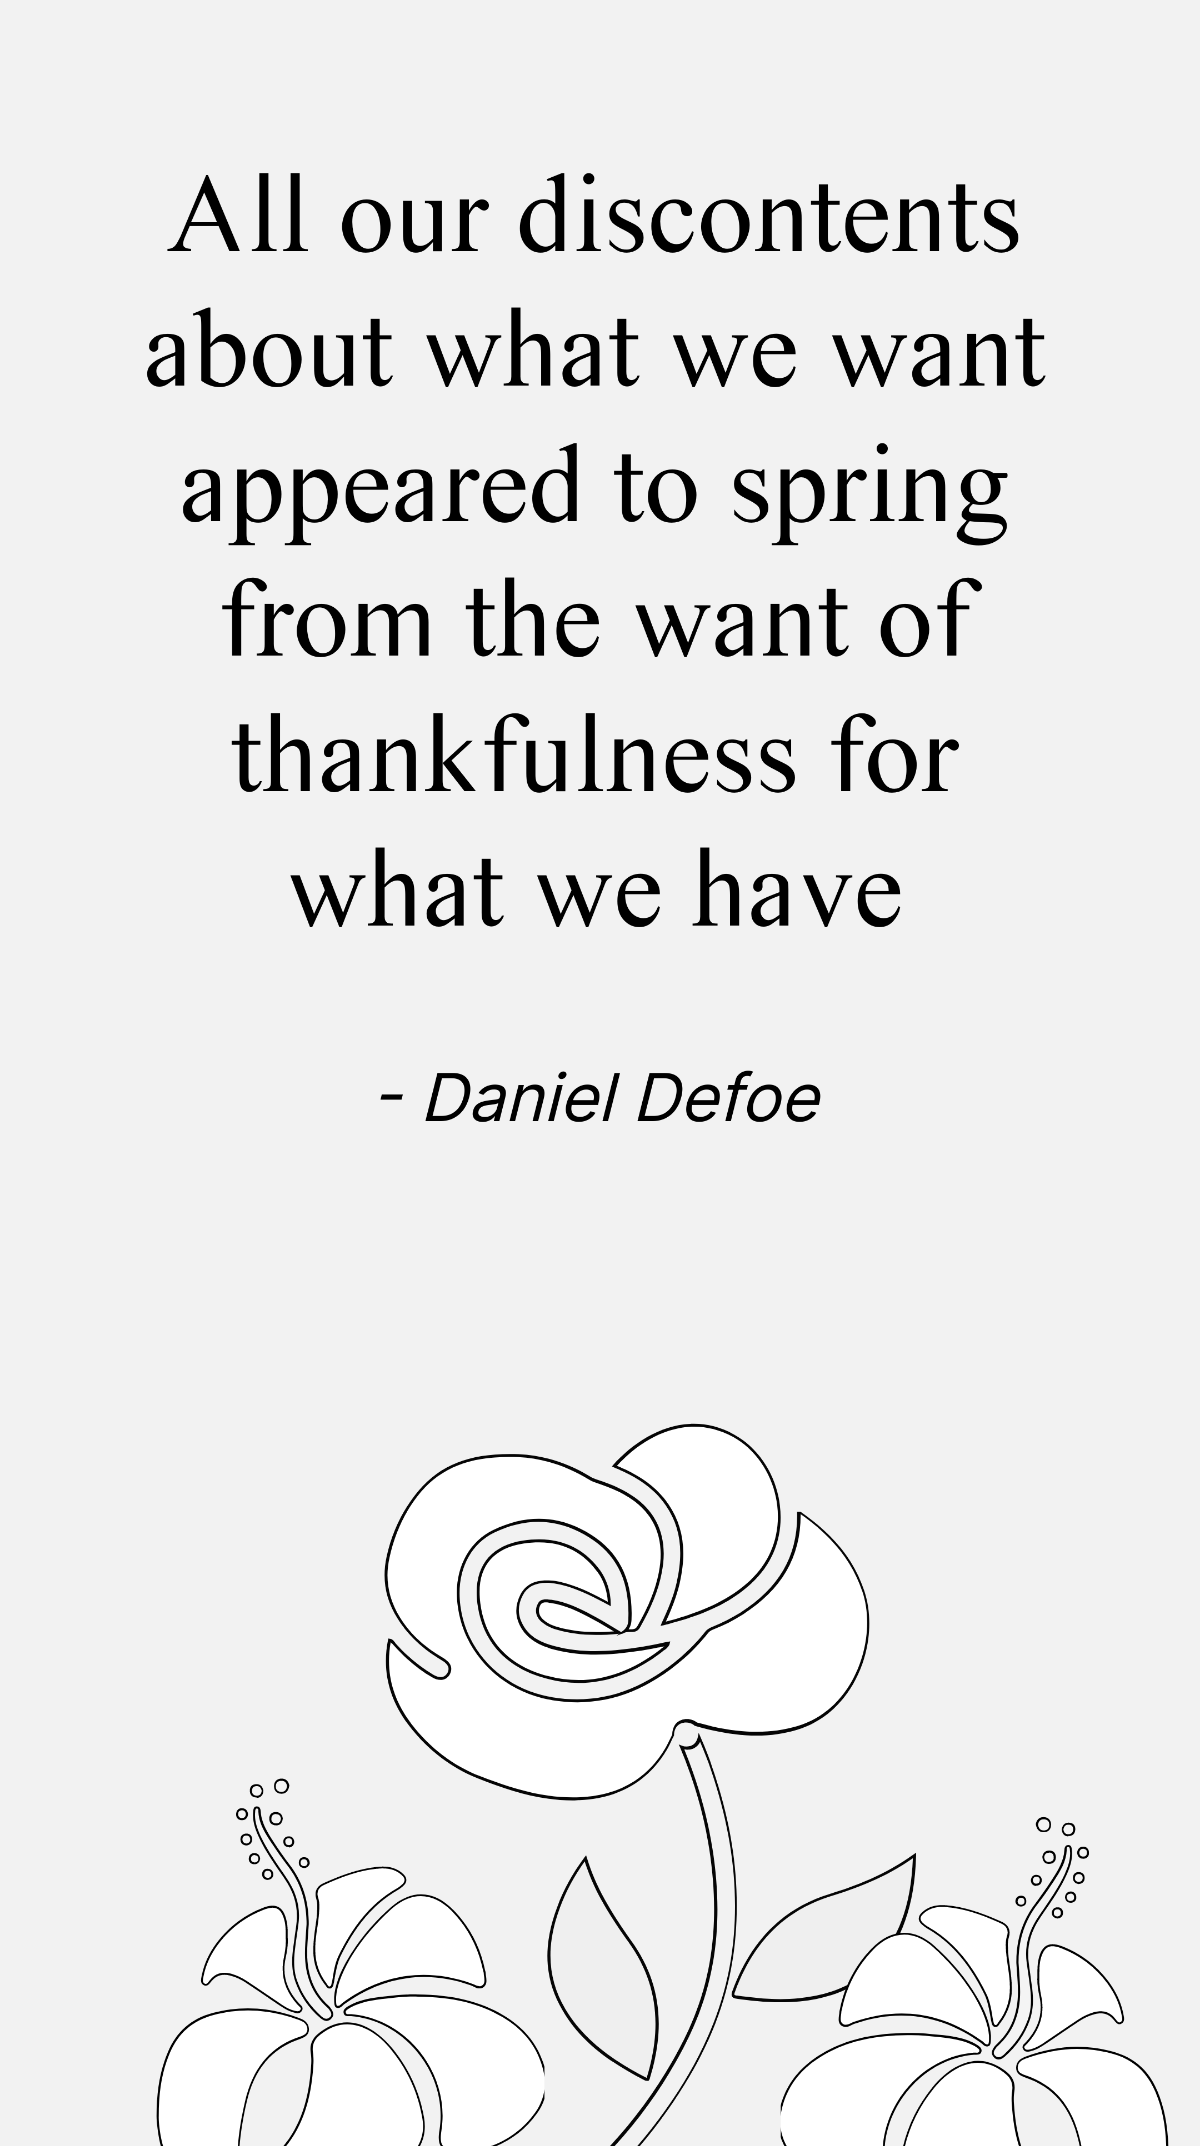 Daniel Defoe - All our discontents about what we want appeared to spring from the want of thankfulness for what we have Template